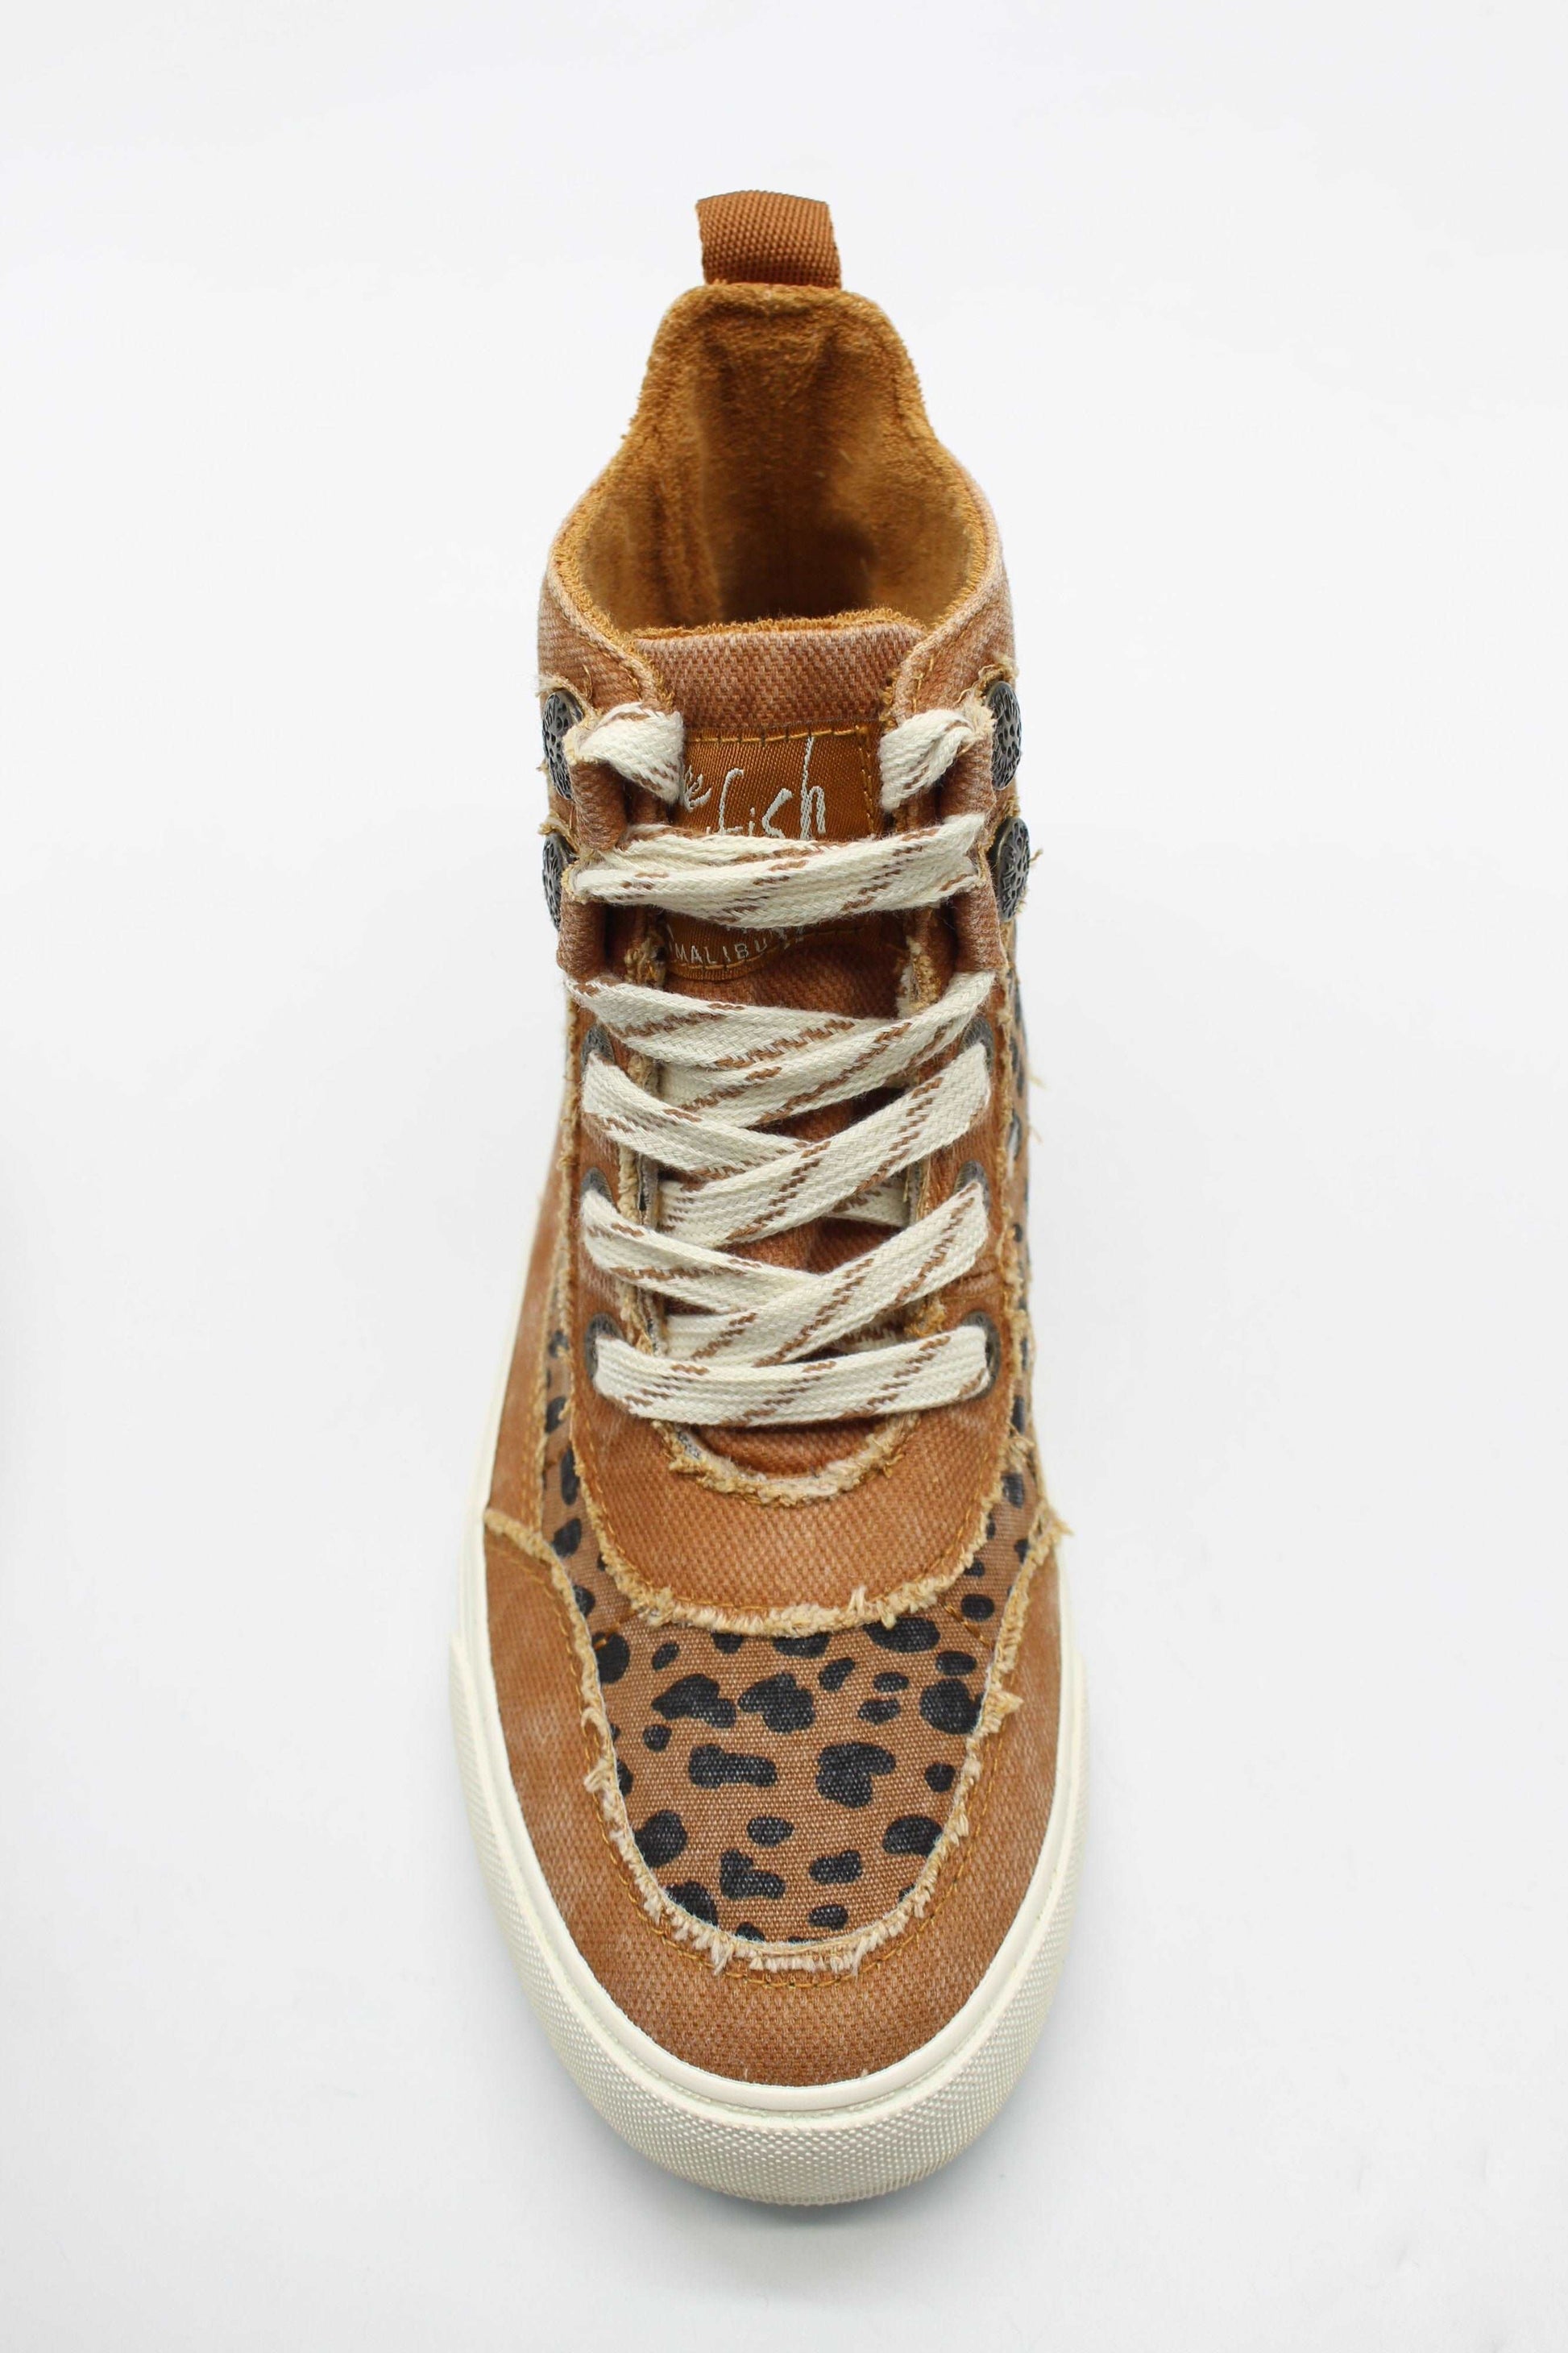 Step into the Wildside Sneakers